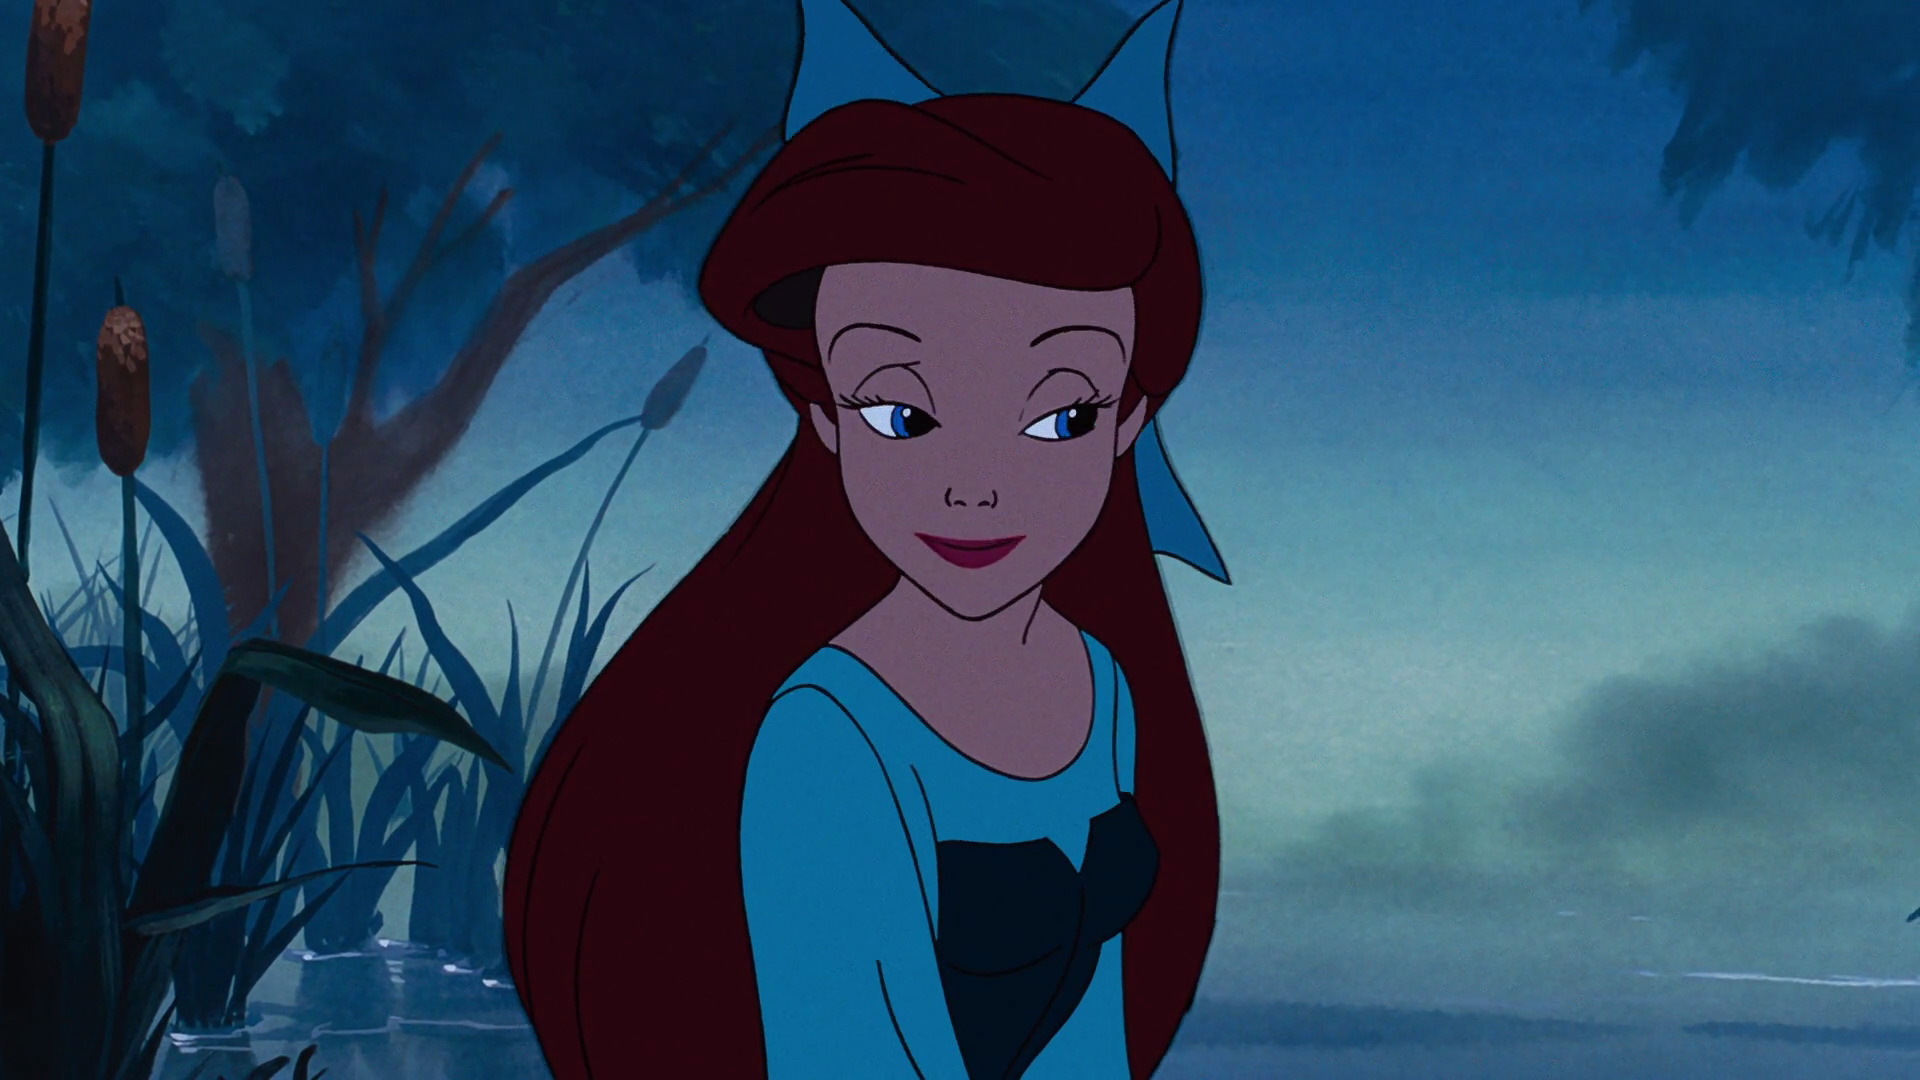 Which ethnicity do you most associate Ariel with? Please say why in ...